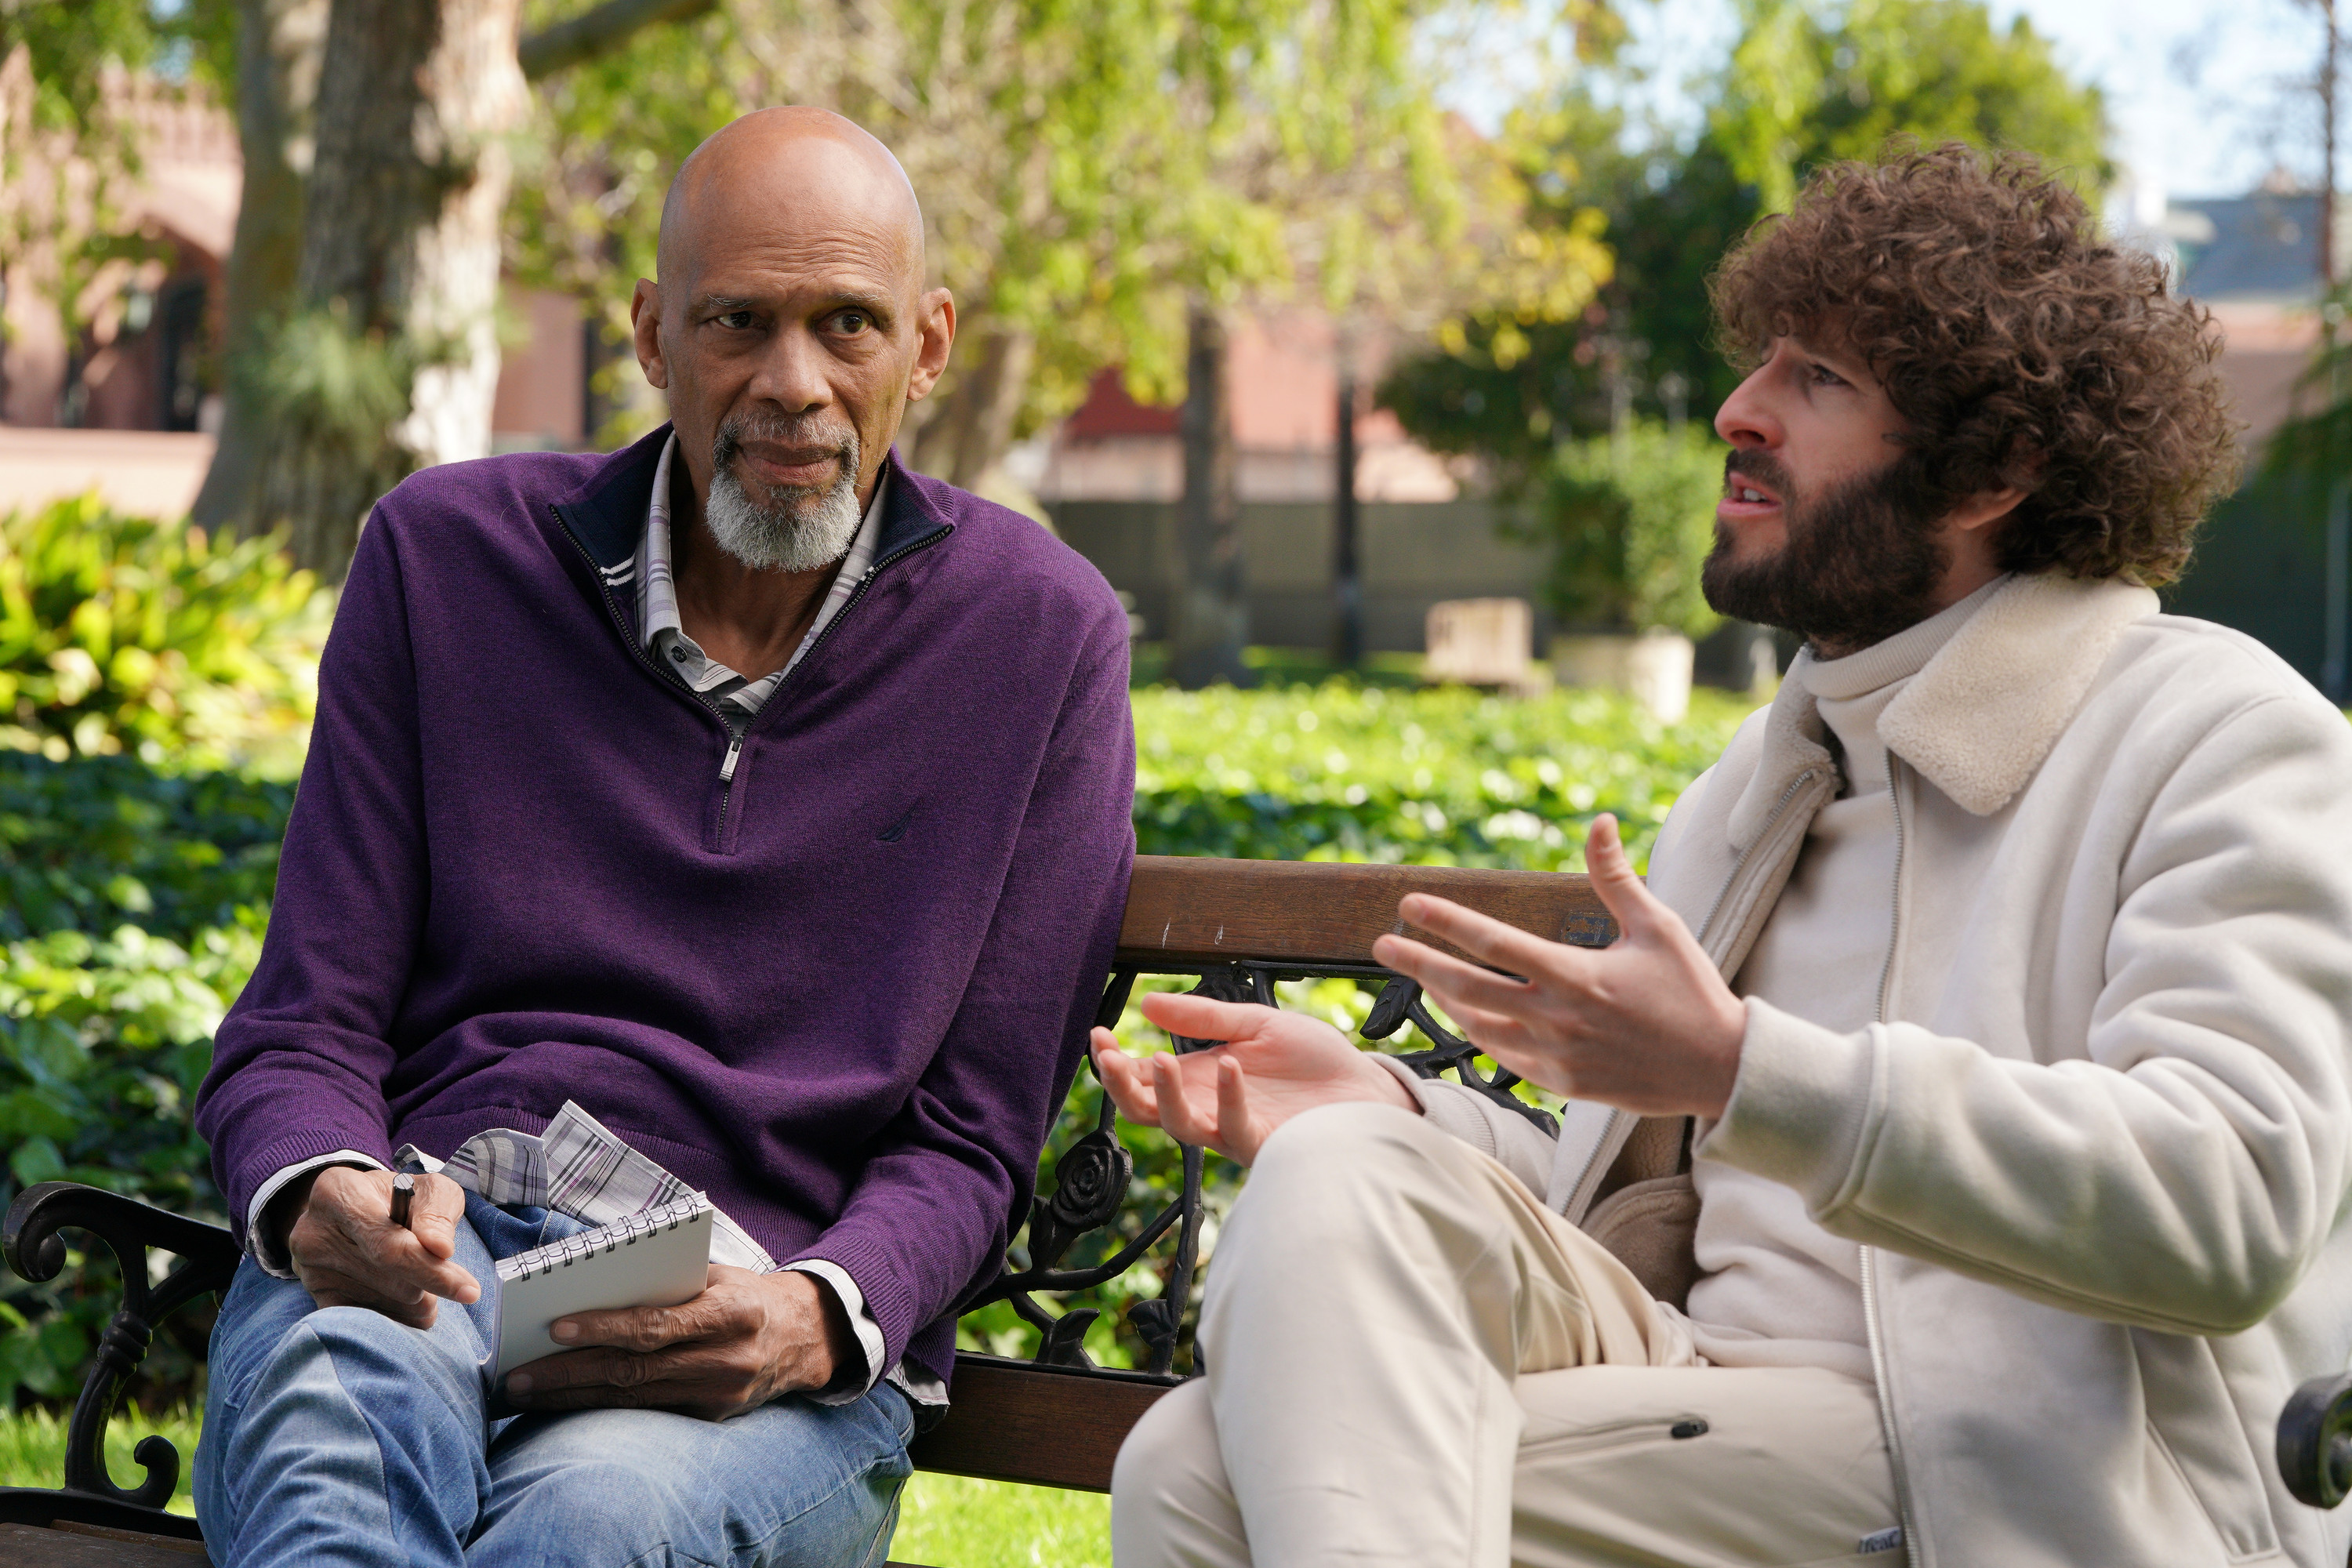 Kareem Abdul-Jabbar and Dave Burd in a season 2 episode of 'Dave' on FX